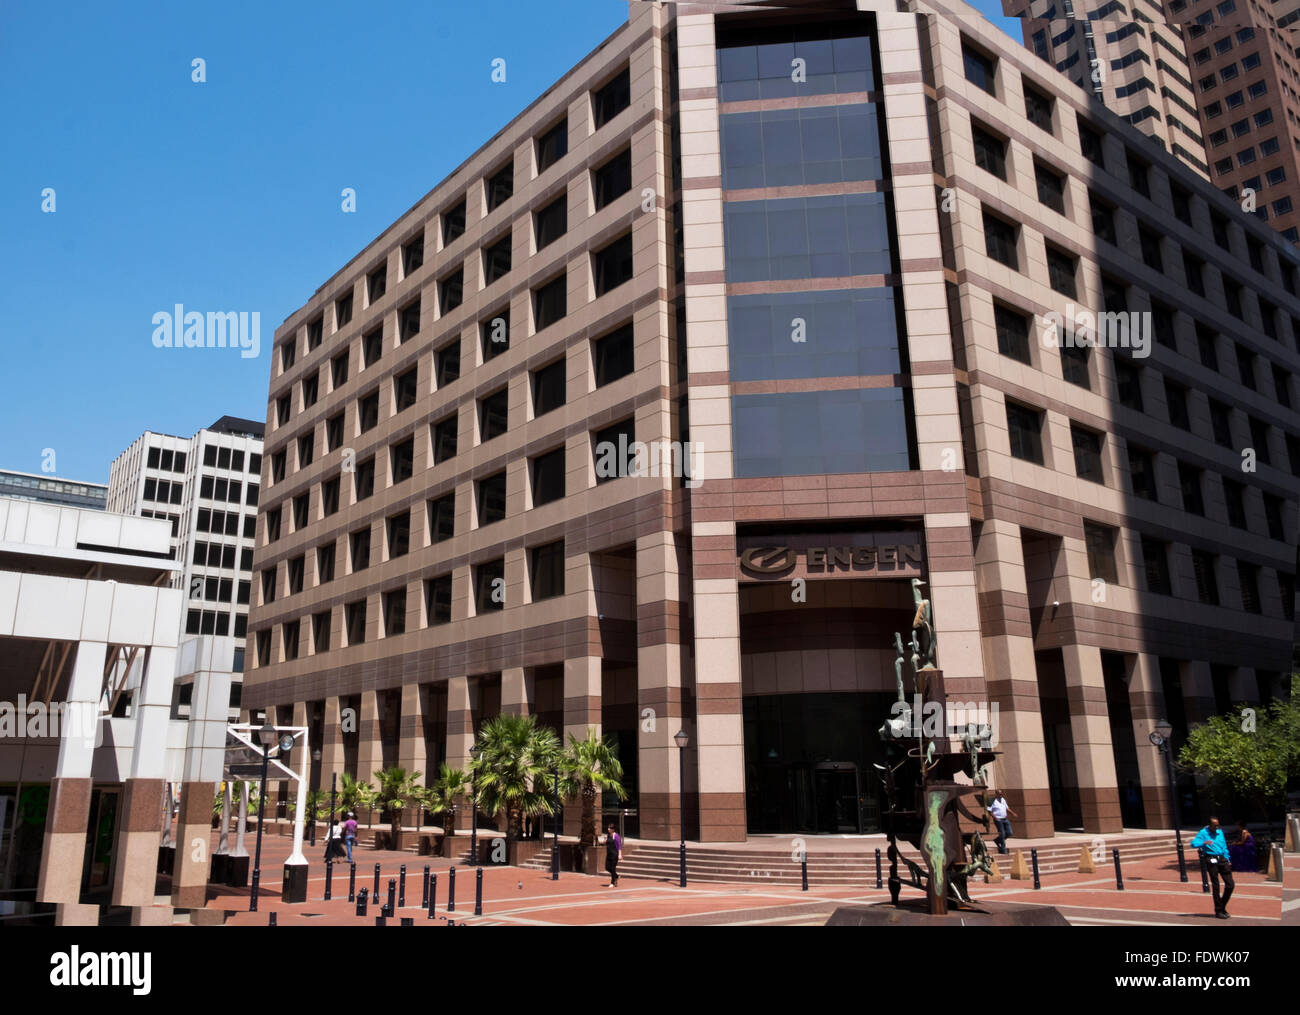 The entrance to the Engen office block in Cape Town CBD Stock Photo